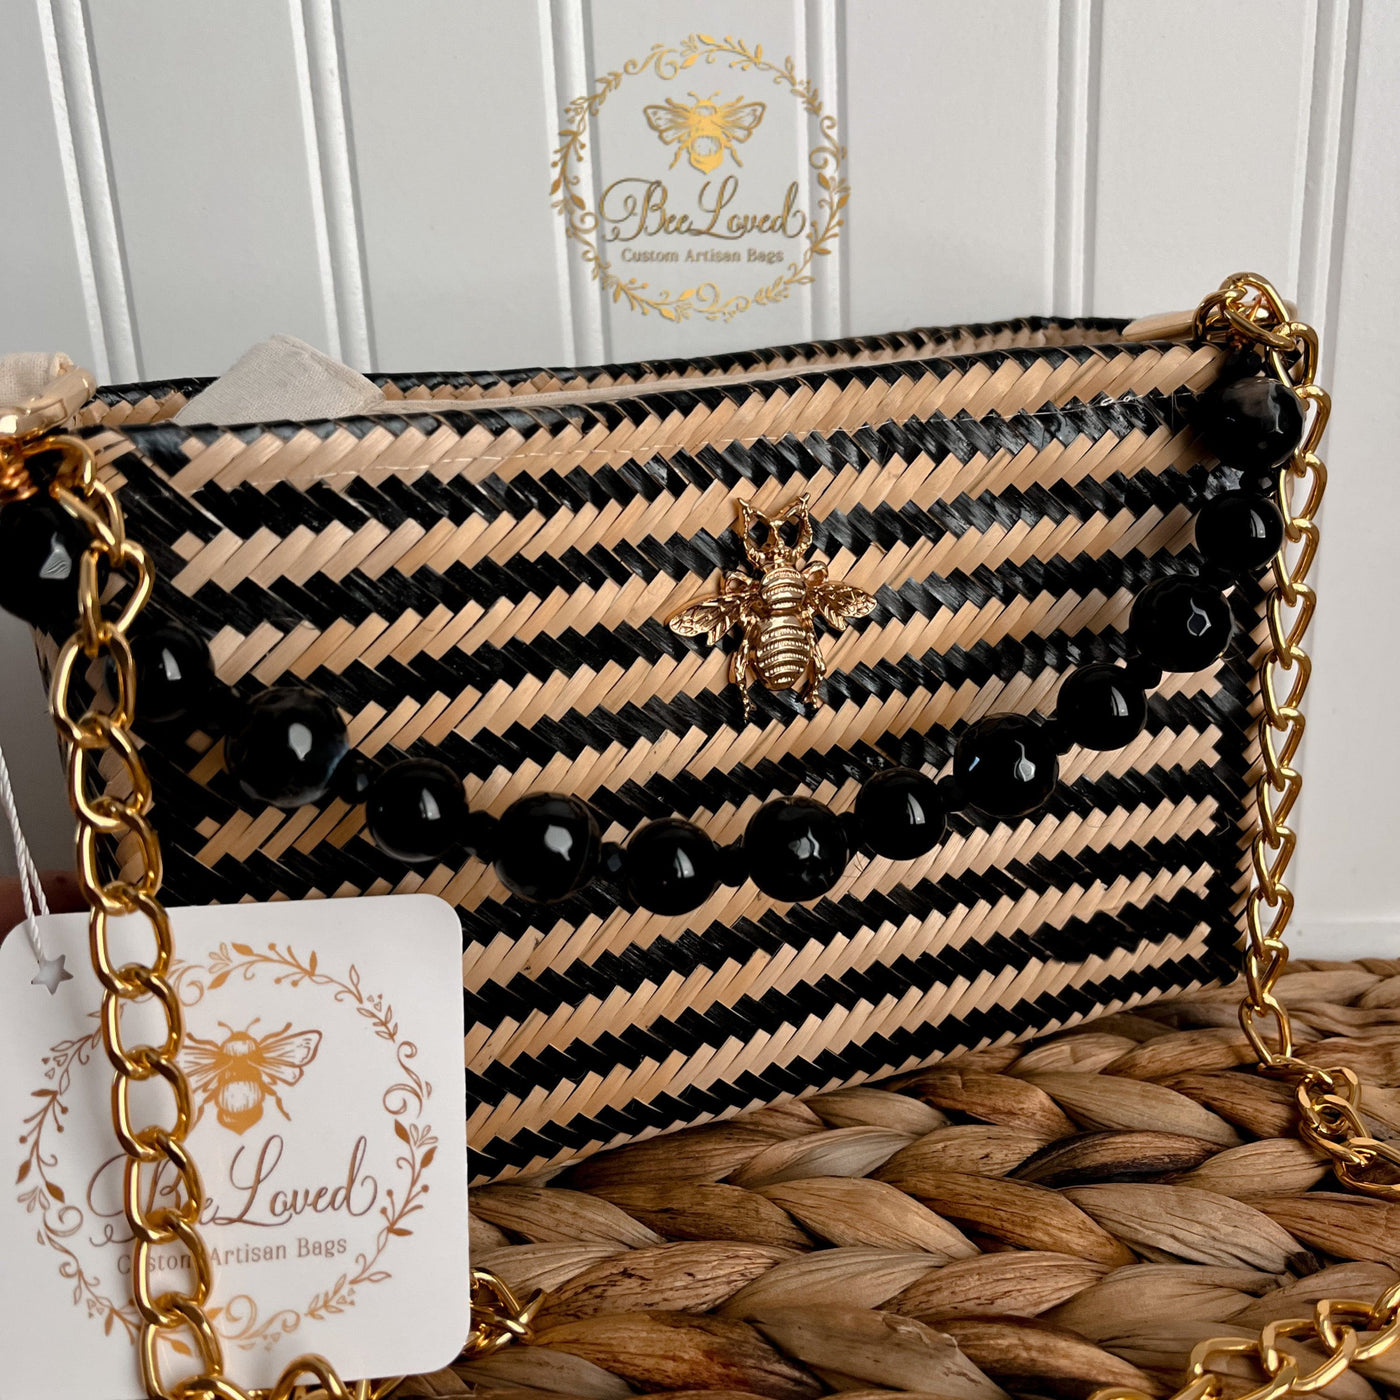 BeeLoved Custom Artisan Bags and Gifts Blakely Crossbody